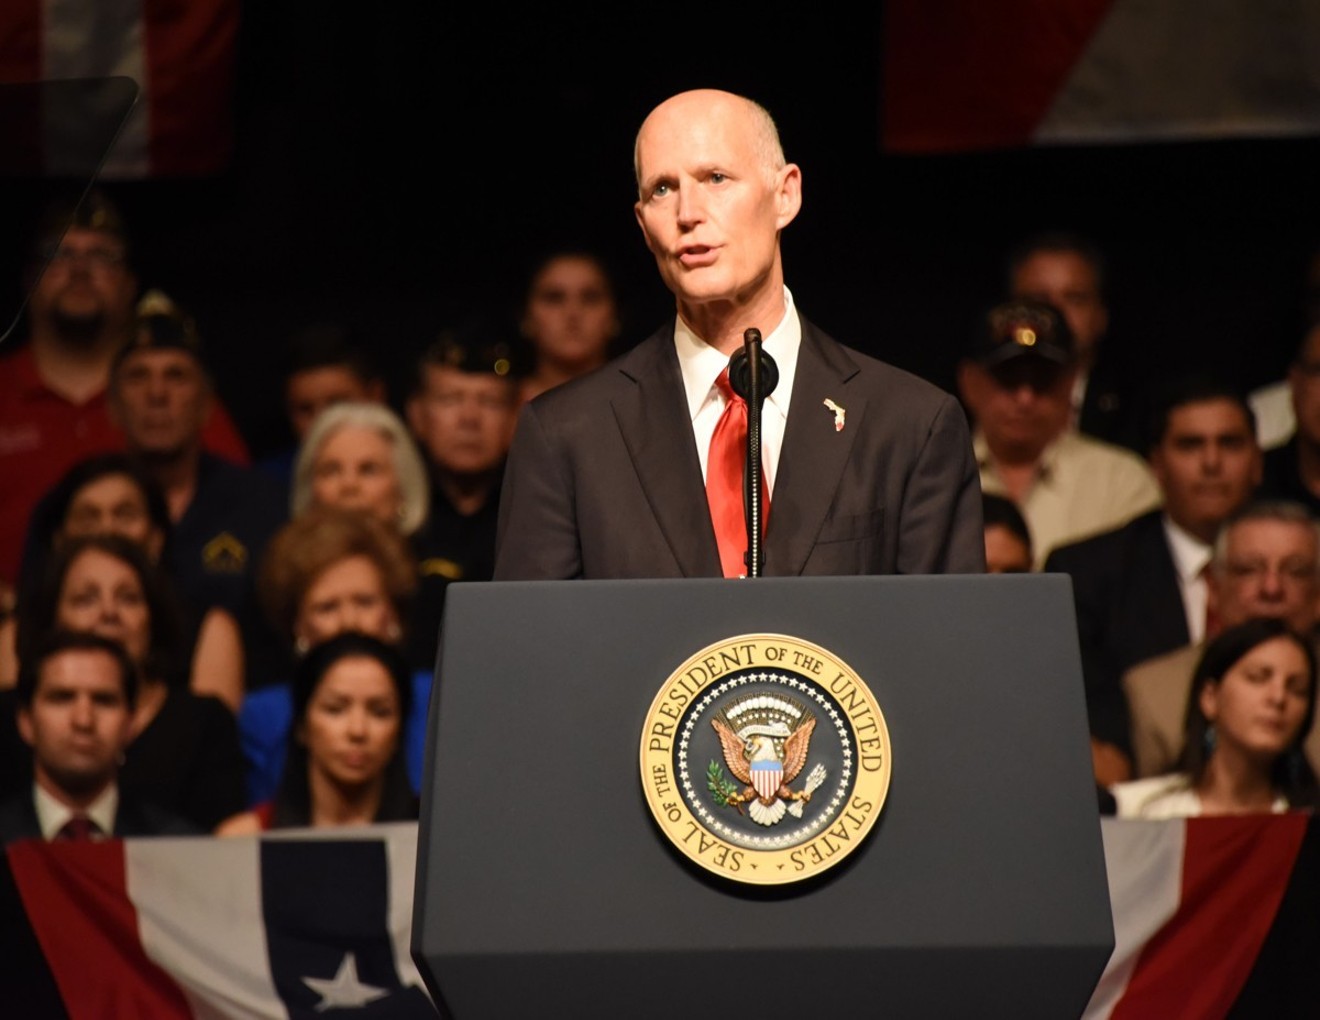 Rick Scott spoke at a rally before Donald Trump, so what did you think he'd do in Washington?